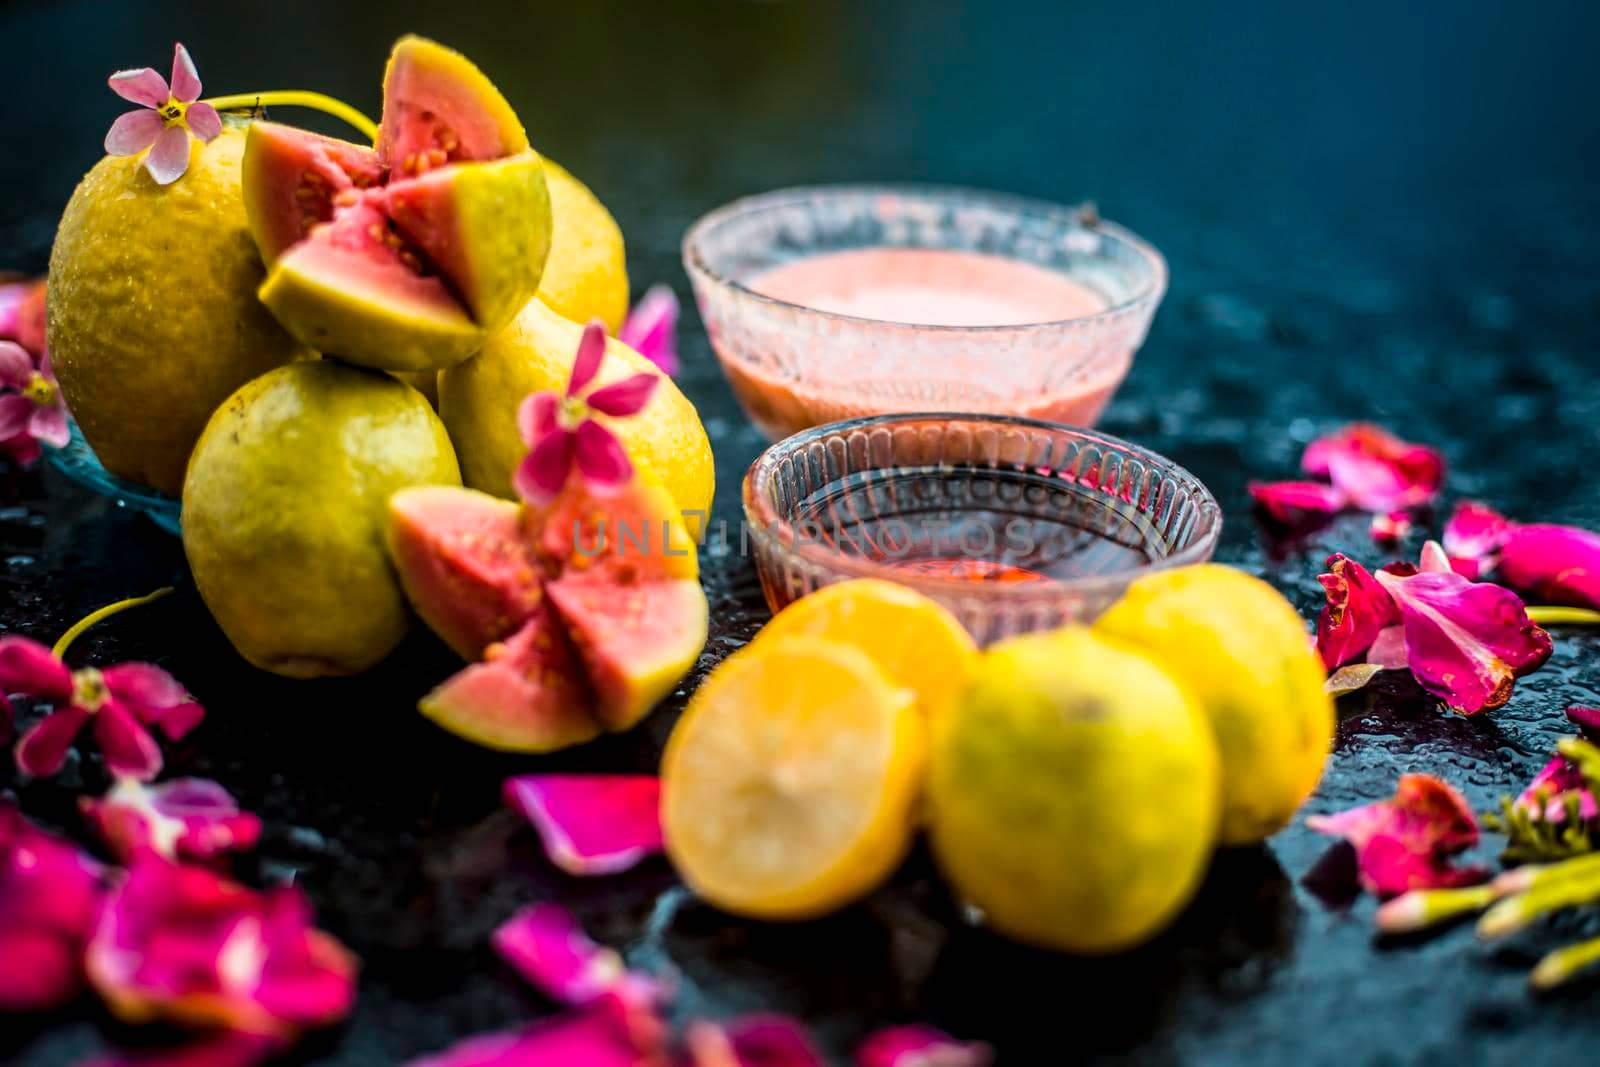 The easiest method to cure acne and scars with guava face mask consisting of guava pulp, honey, and some lemon juice.With ingredients on wooden surface in a glass bowl.; by mirzamlk